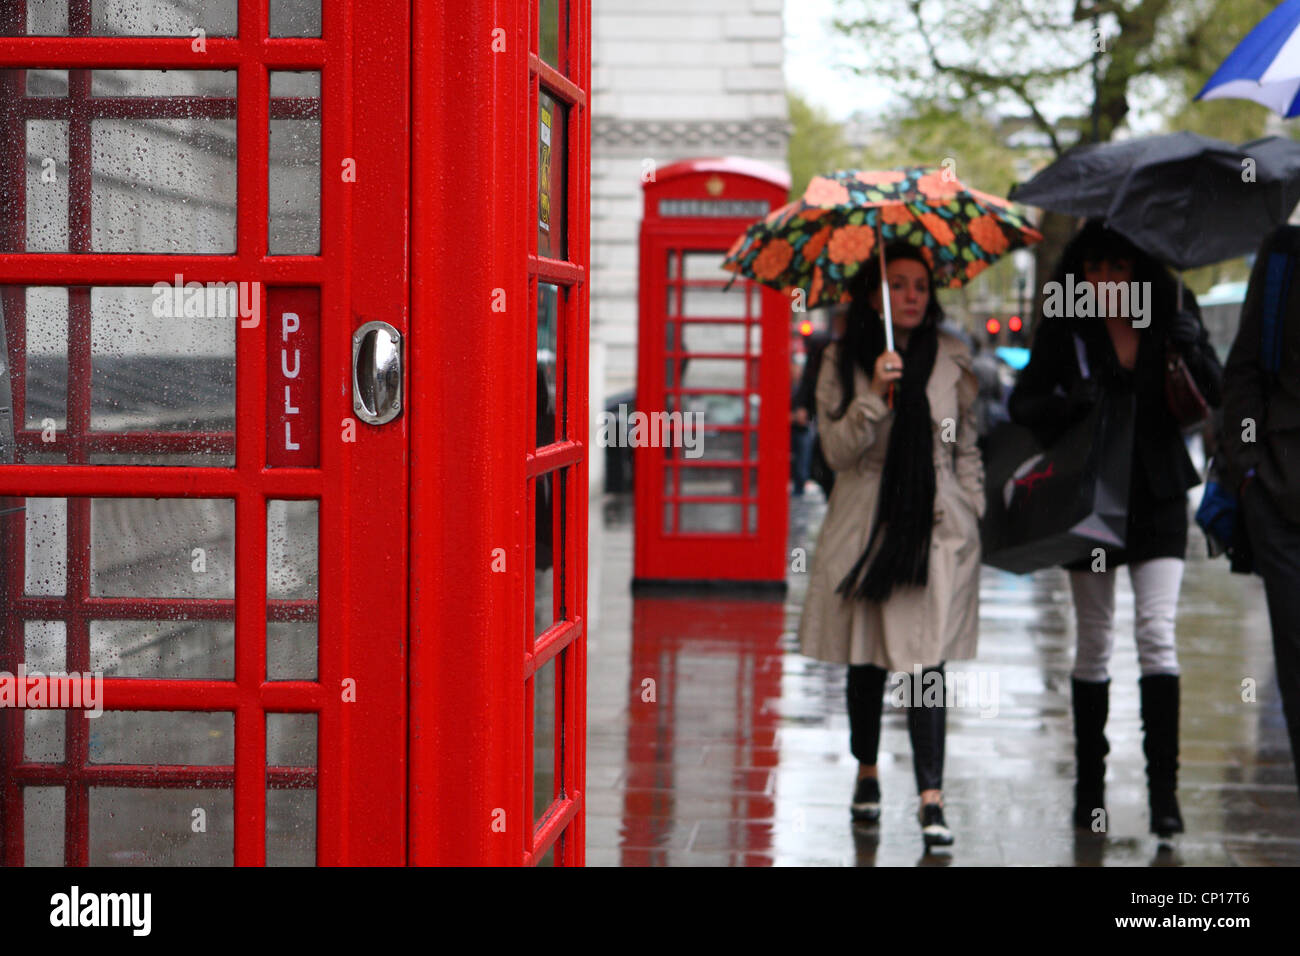 people walking in the rain passed red telephone boxes Stock Photo